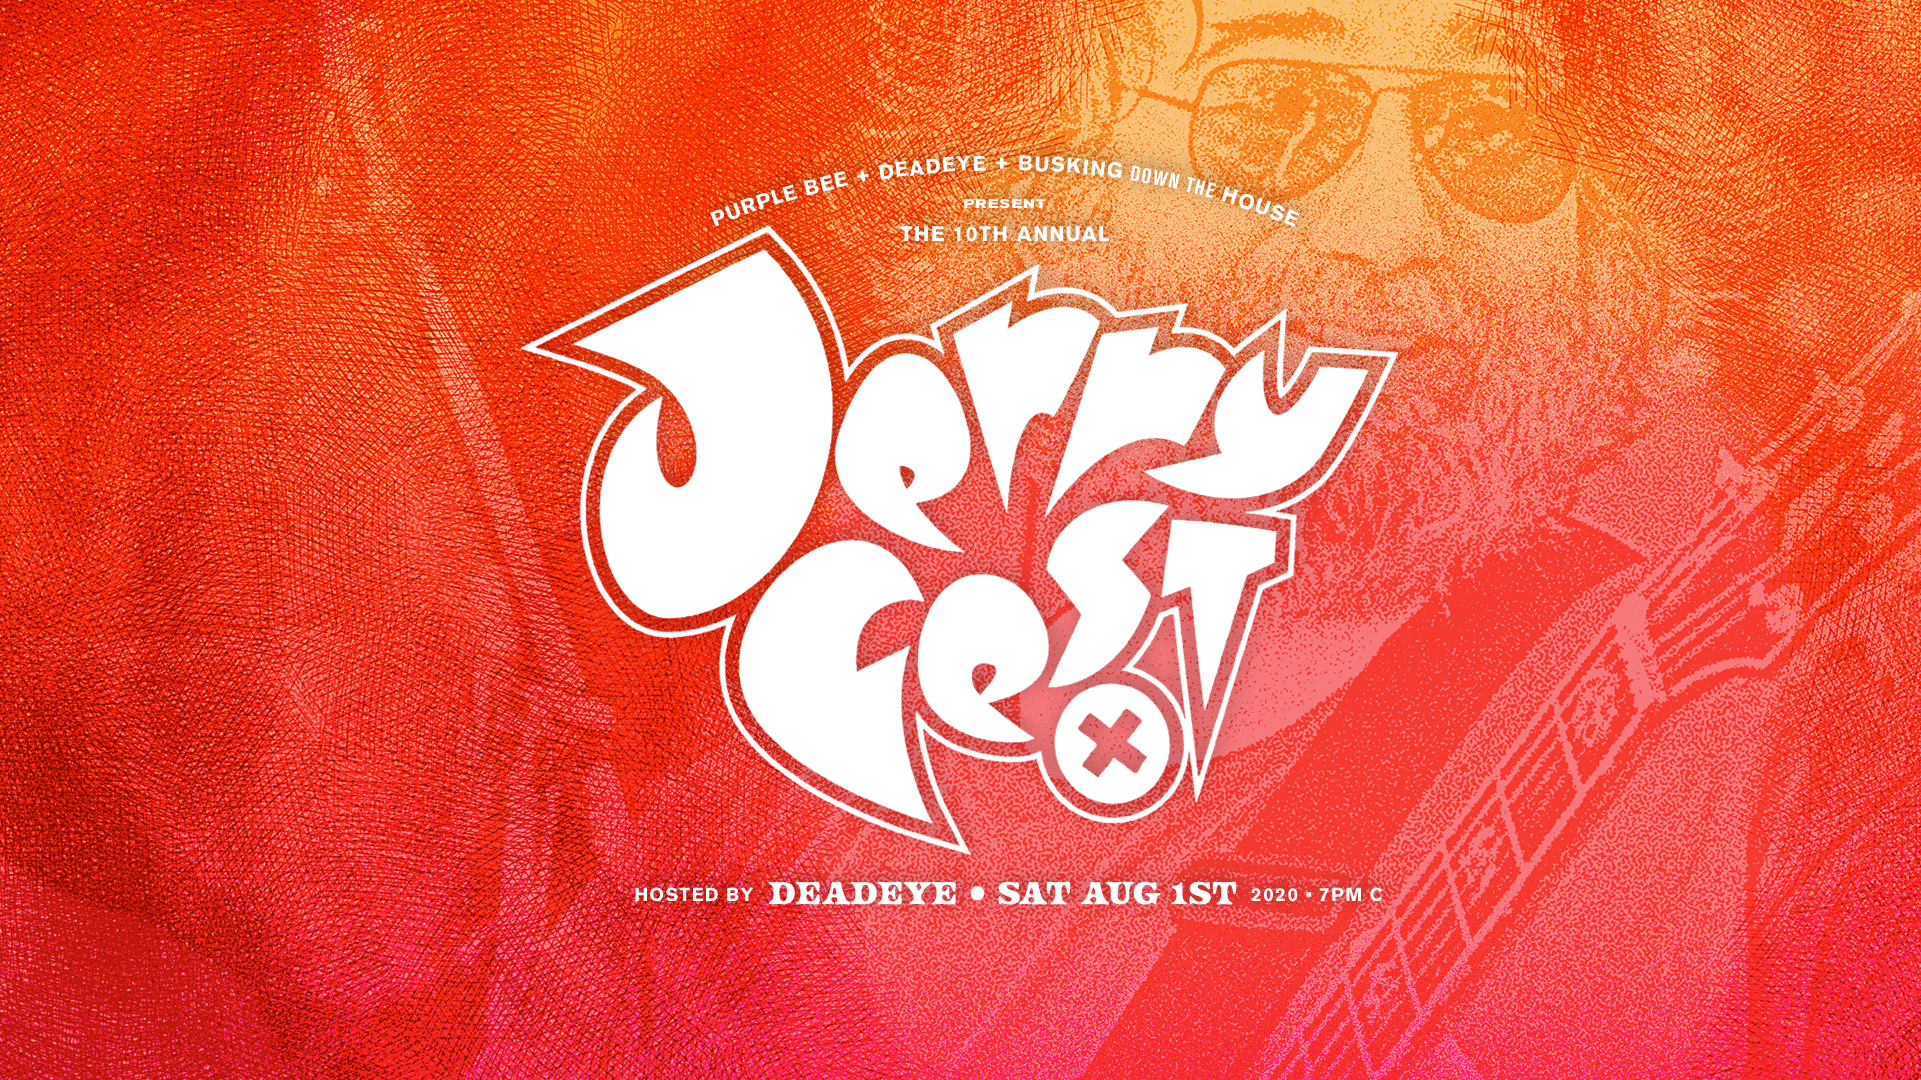 Jerry Fest X • Hosted by DeadEye • with All Star Guests Purple Bee